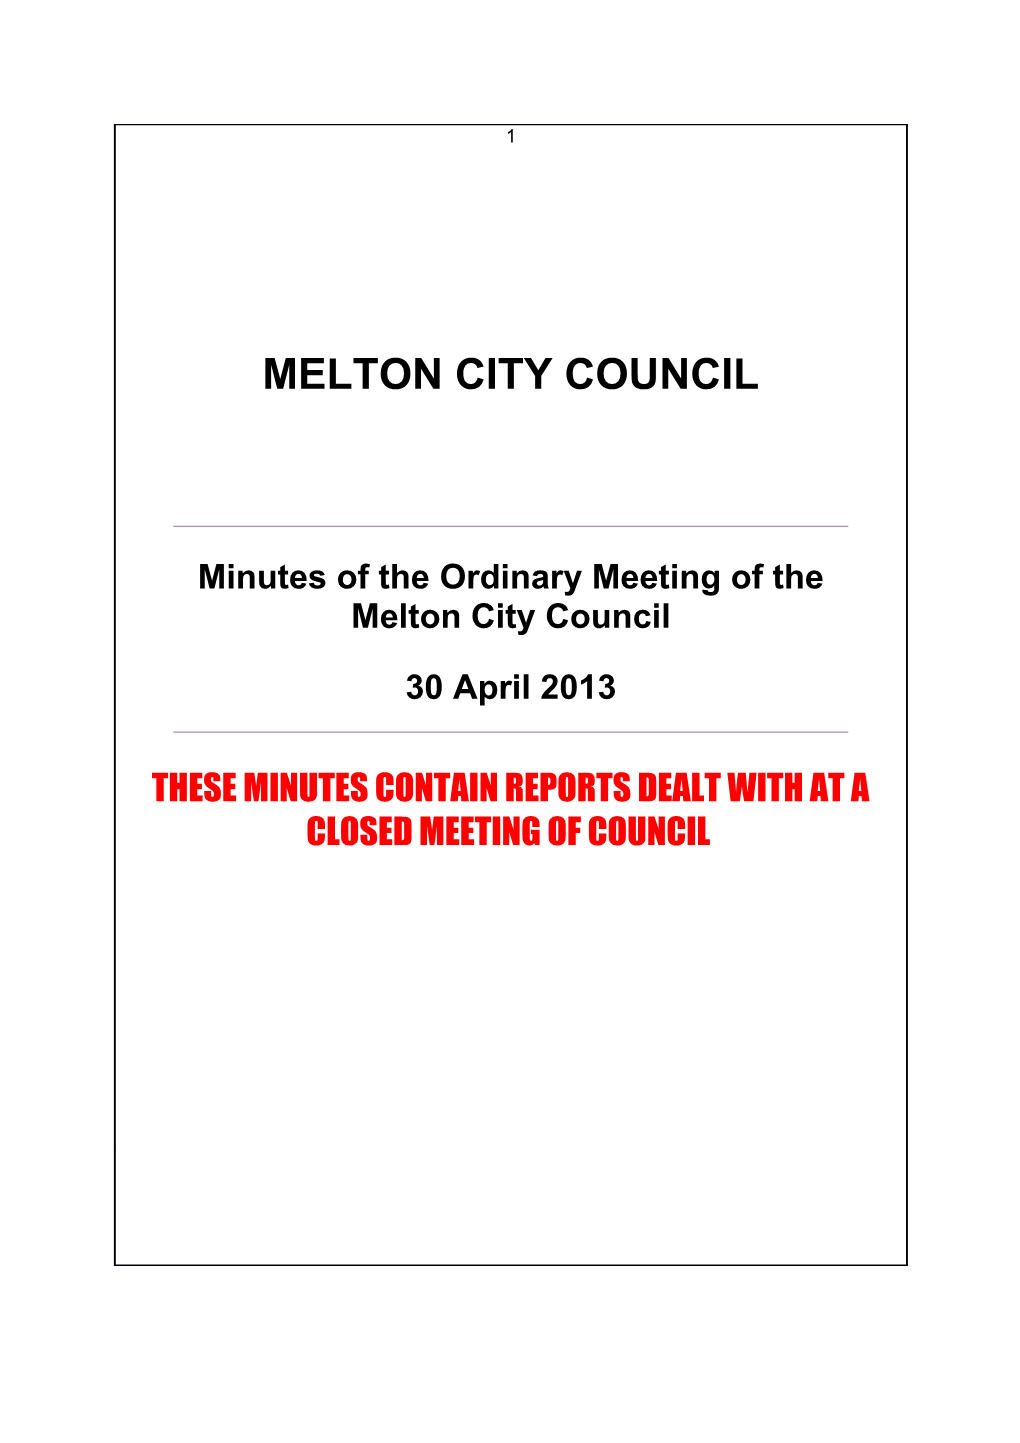 Minutes of Ordinary Meeting of Council - 30 April 2013